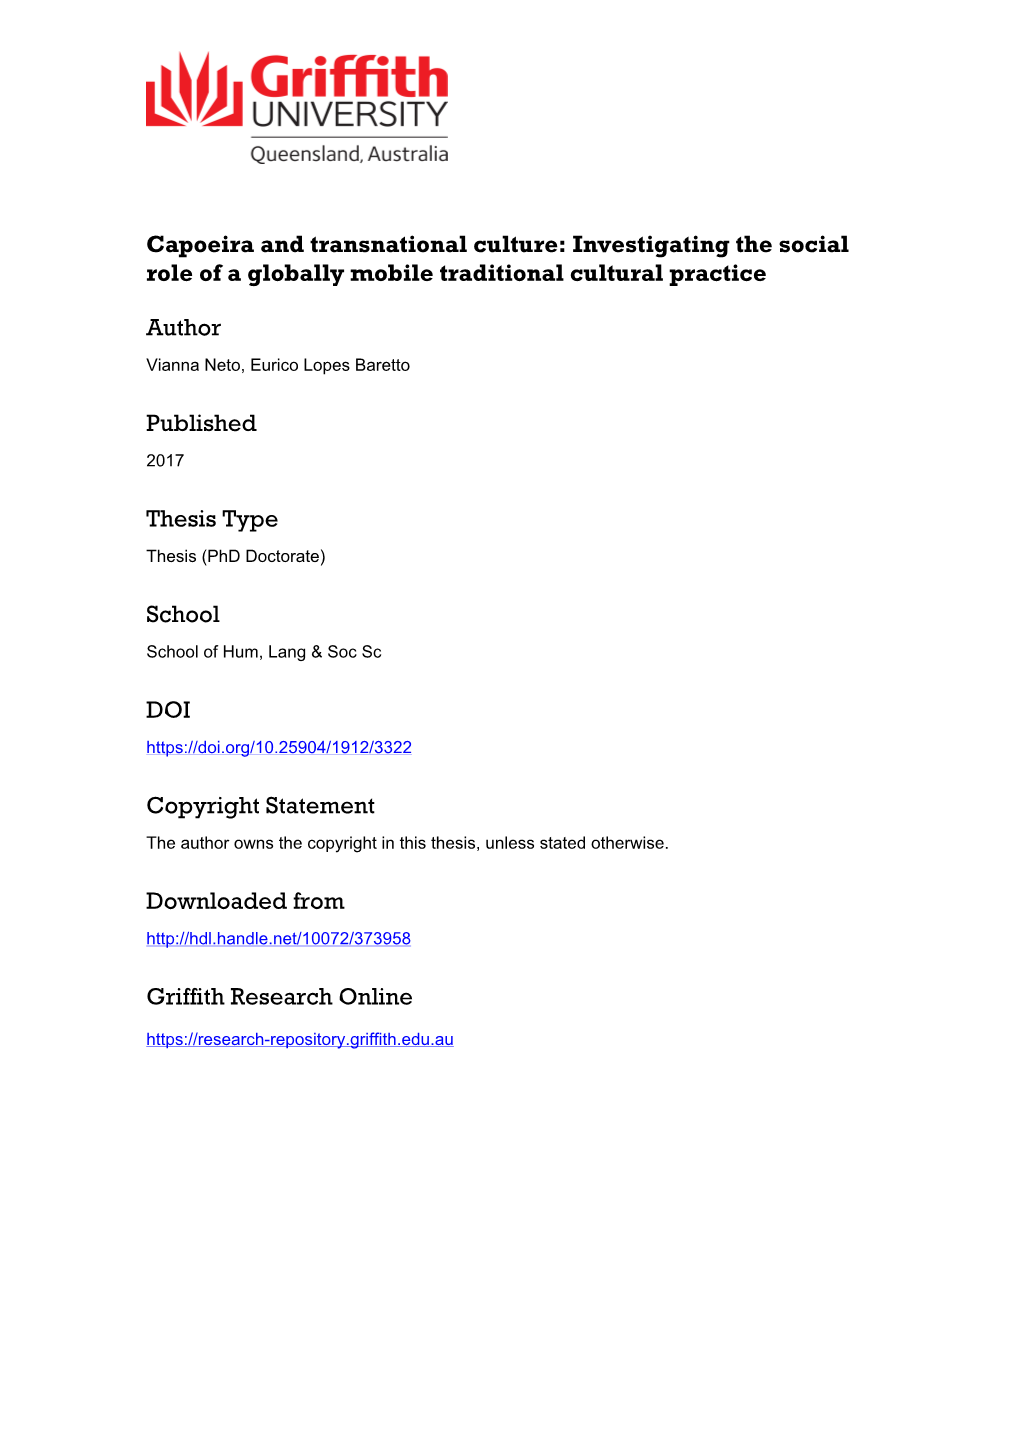 Capoeira and Transnational Culture: Investigating the Social Role of a Globally Mobile Traditional Cultural Practice